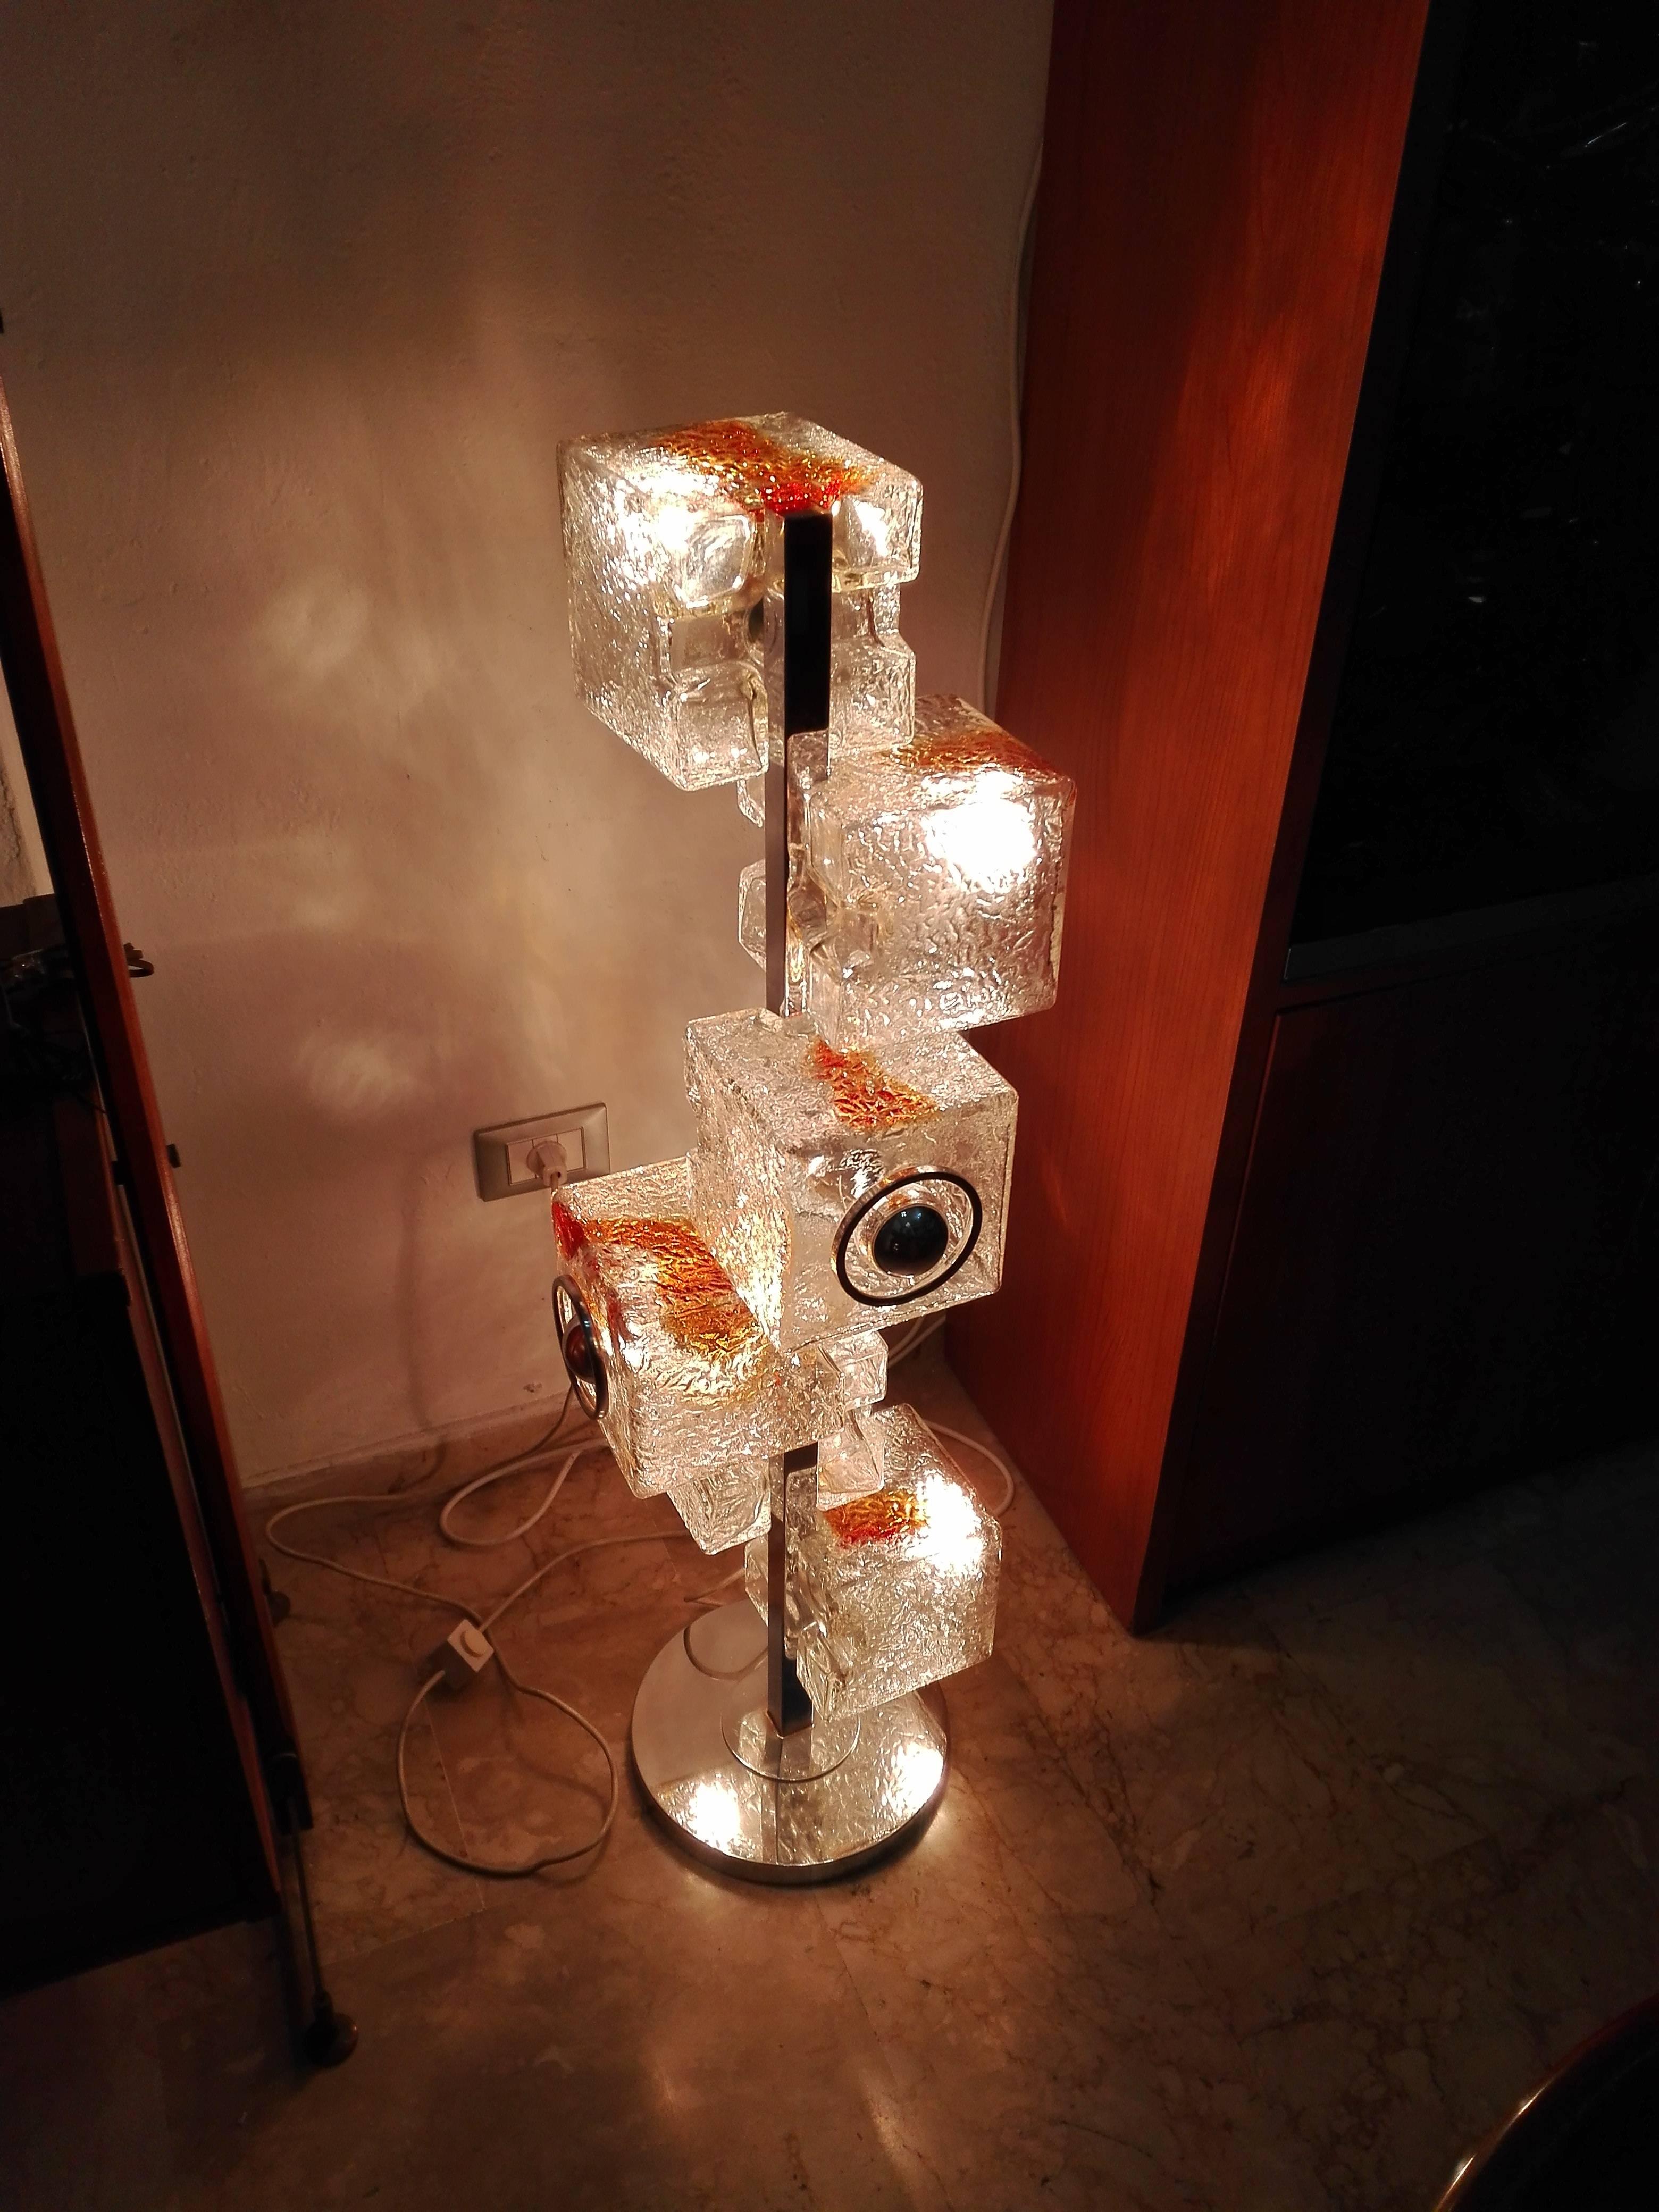 Made of Murano blown glass.
It has a marble base and a chromed metal base.
Glass elements with different positions of light
When lit, this lamp creates a magical and relaxing atmosphere.
In perfect original condition.